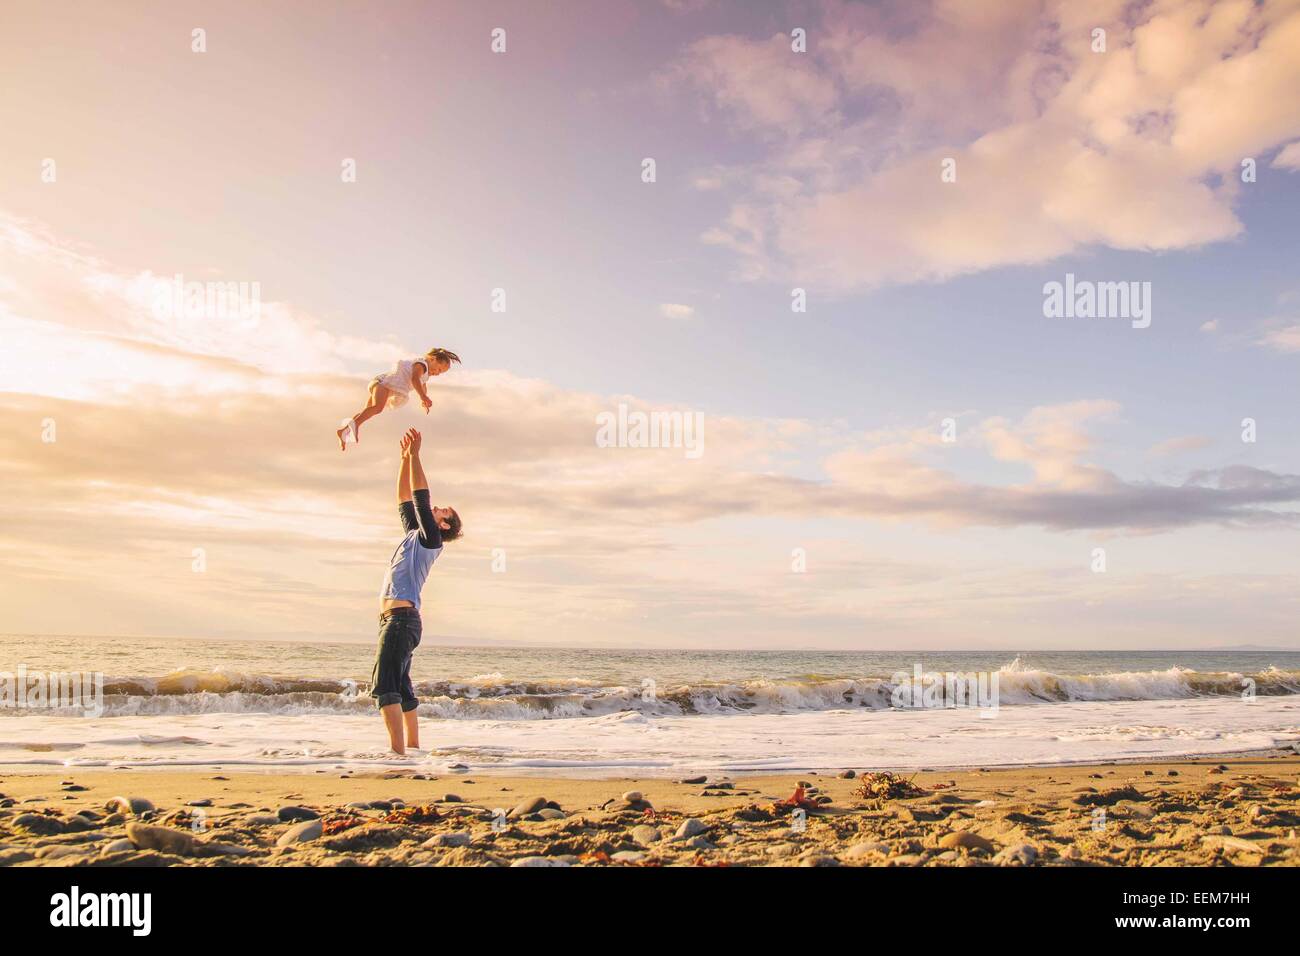 Father standing on beach throwing his daughter in the air, USA Stock Photo